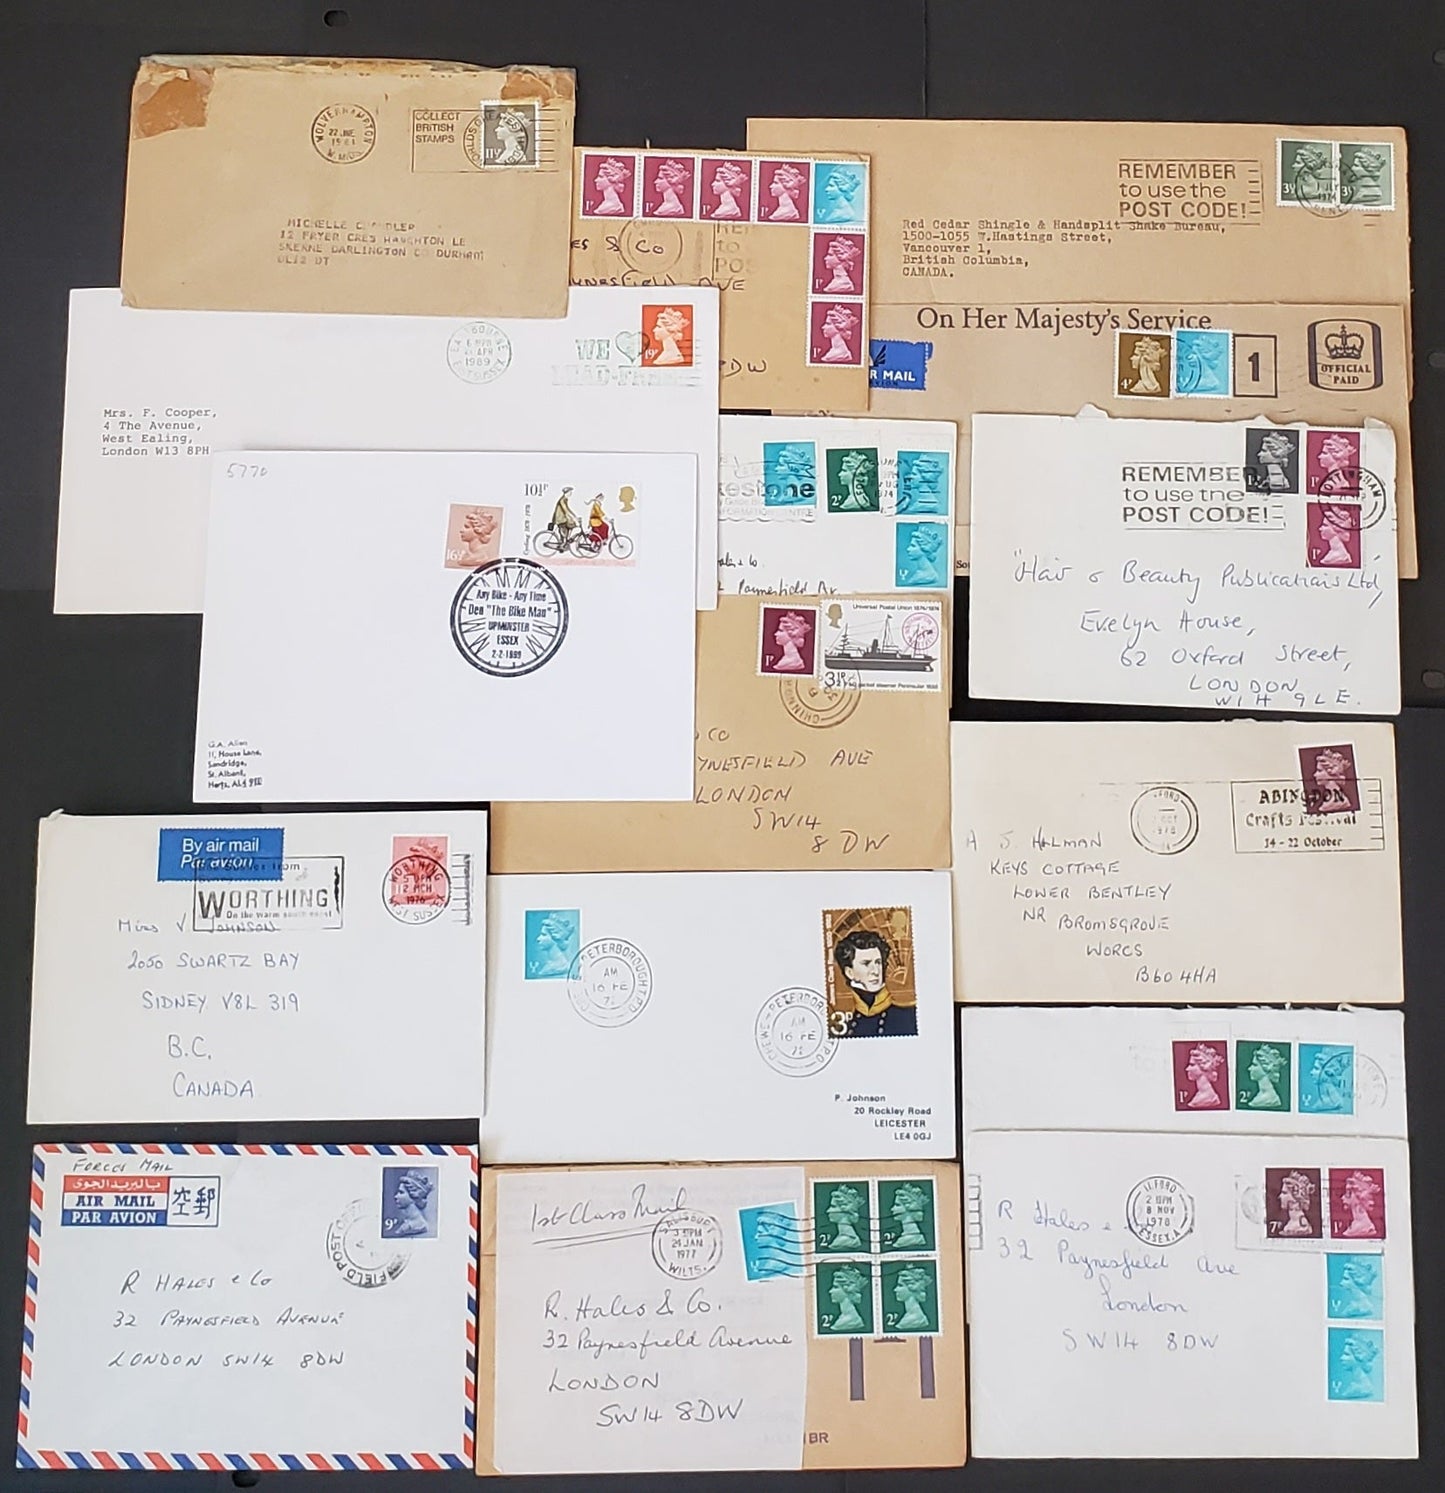 Lot 347 Great Britain 1971-2006 Decimal Machin Covers, A Selection of 34 Different, With Values From 1/2p to 16p and 1st, All Sent Within UK, Net. Est. $10.